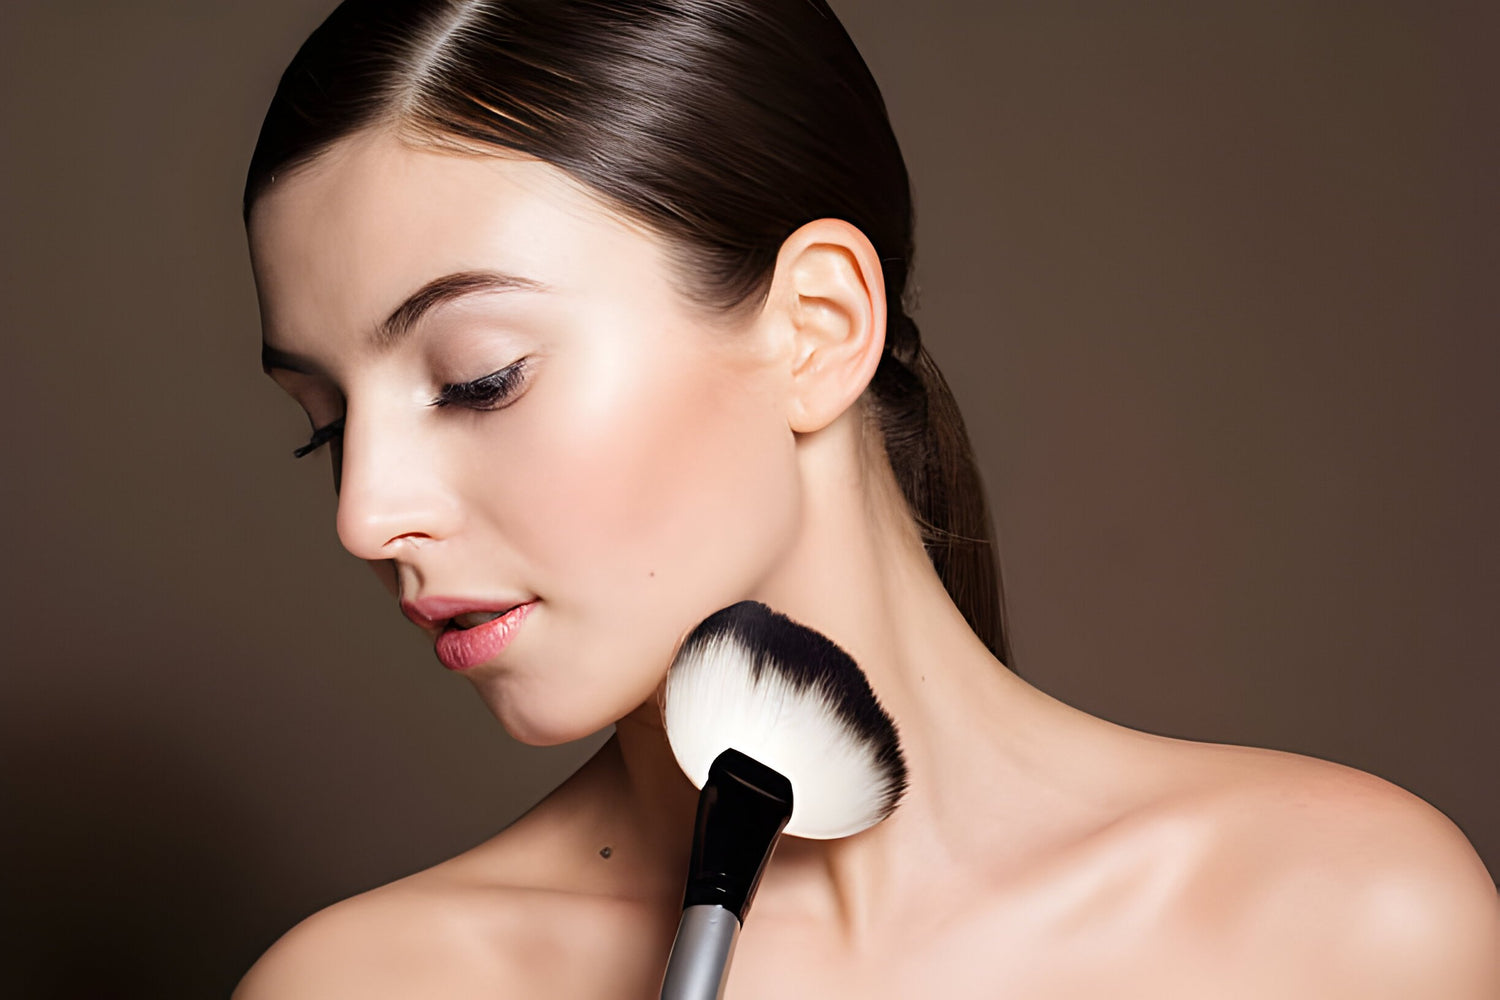 a brunette woman using a make up brush on her face looking to the side darker background